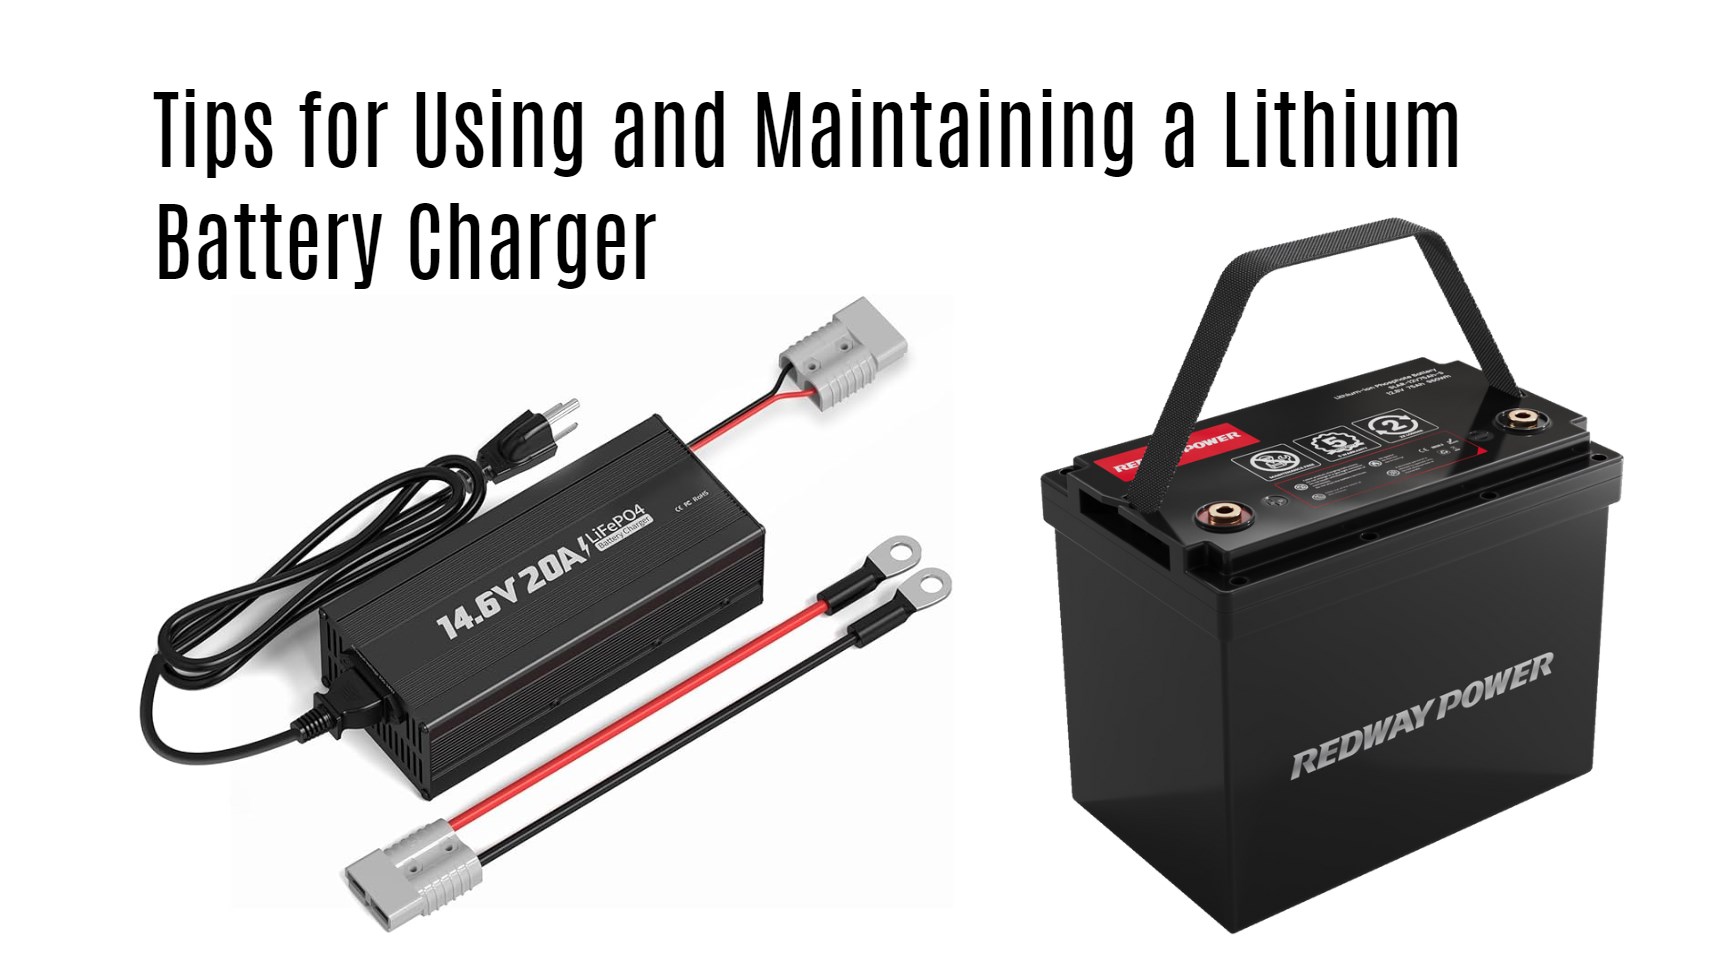 Tips for Using and Maintaining a Lithium Battery Charger